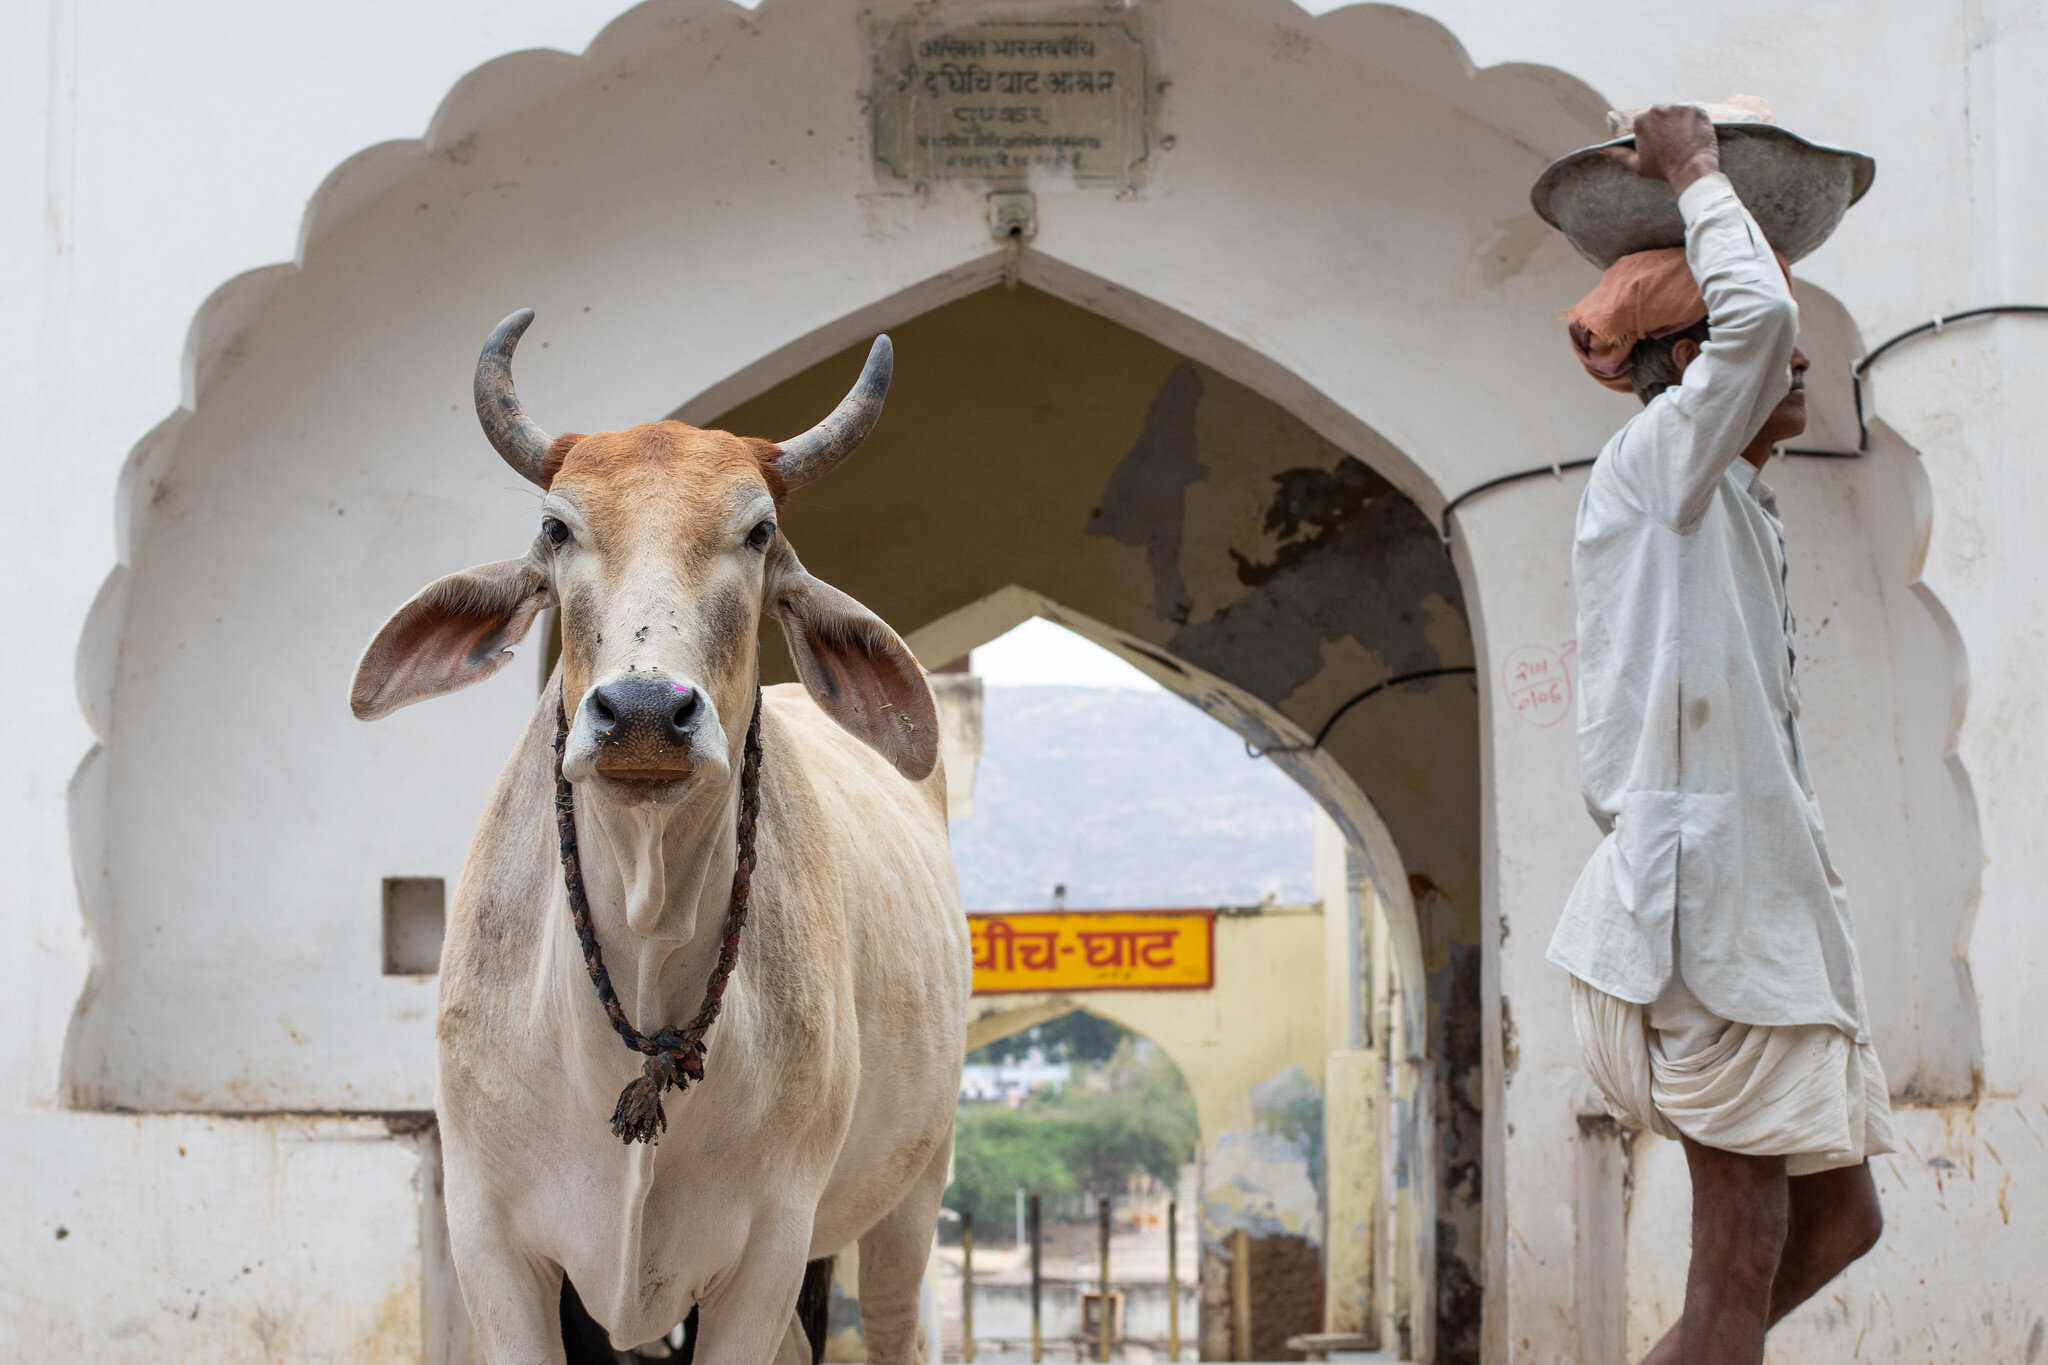 A candid street photo taken in Pushkar, Rajasthan, India.  A cow stares towards the camera while a local man walks past.